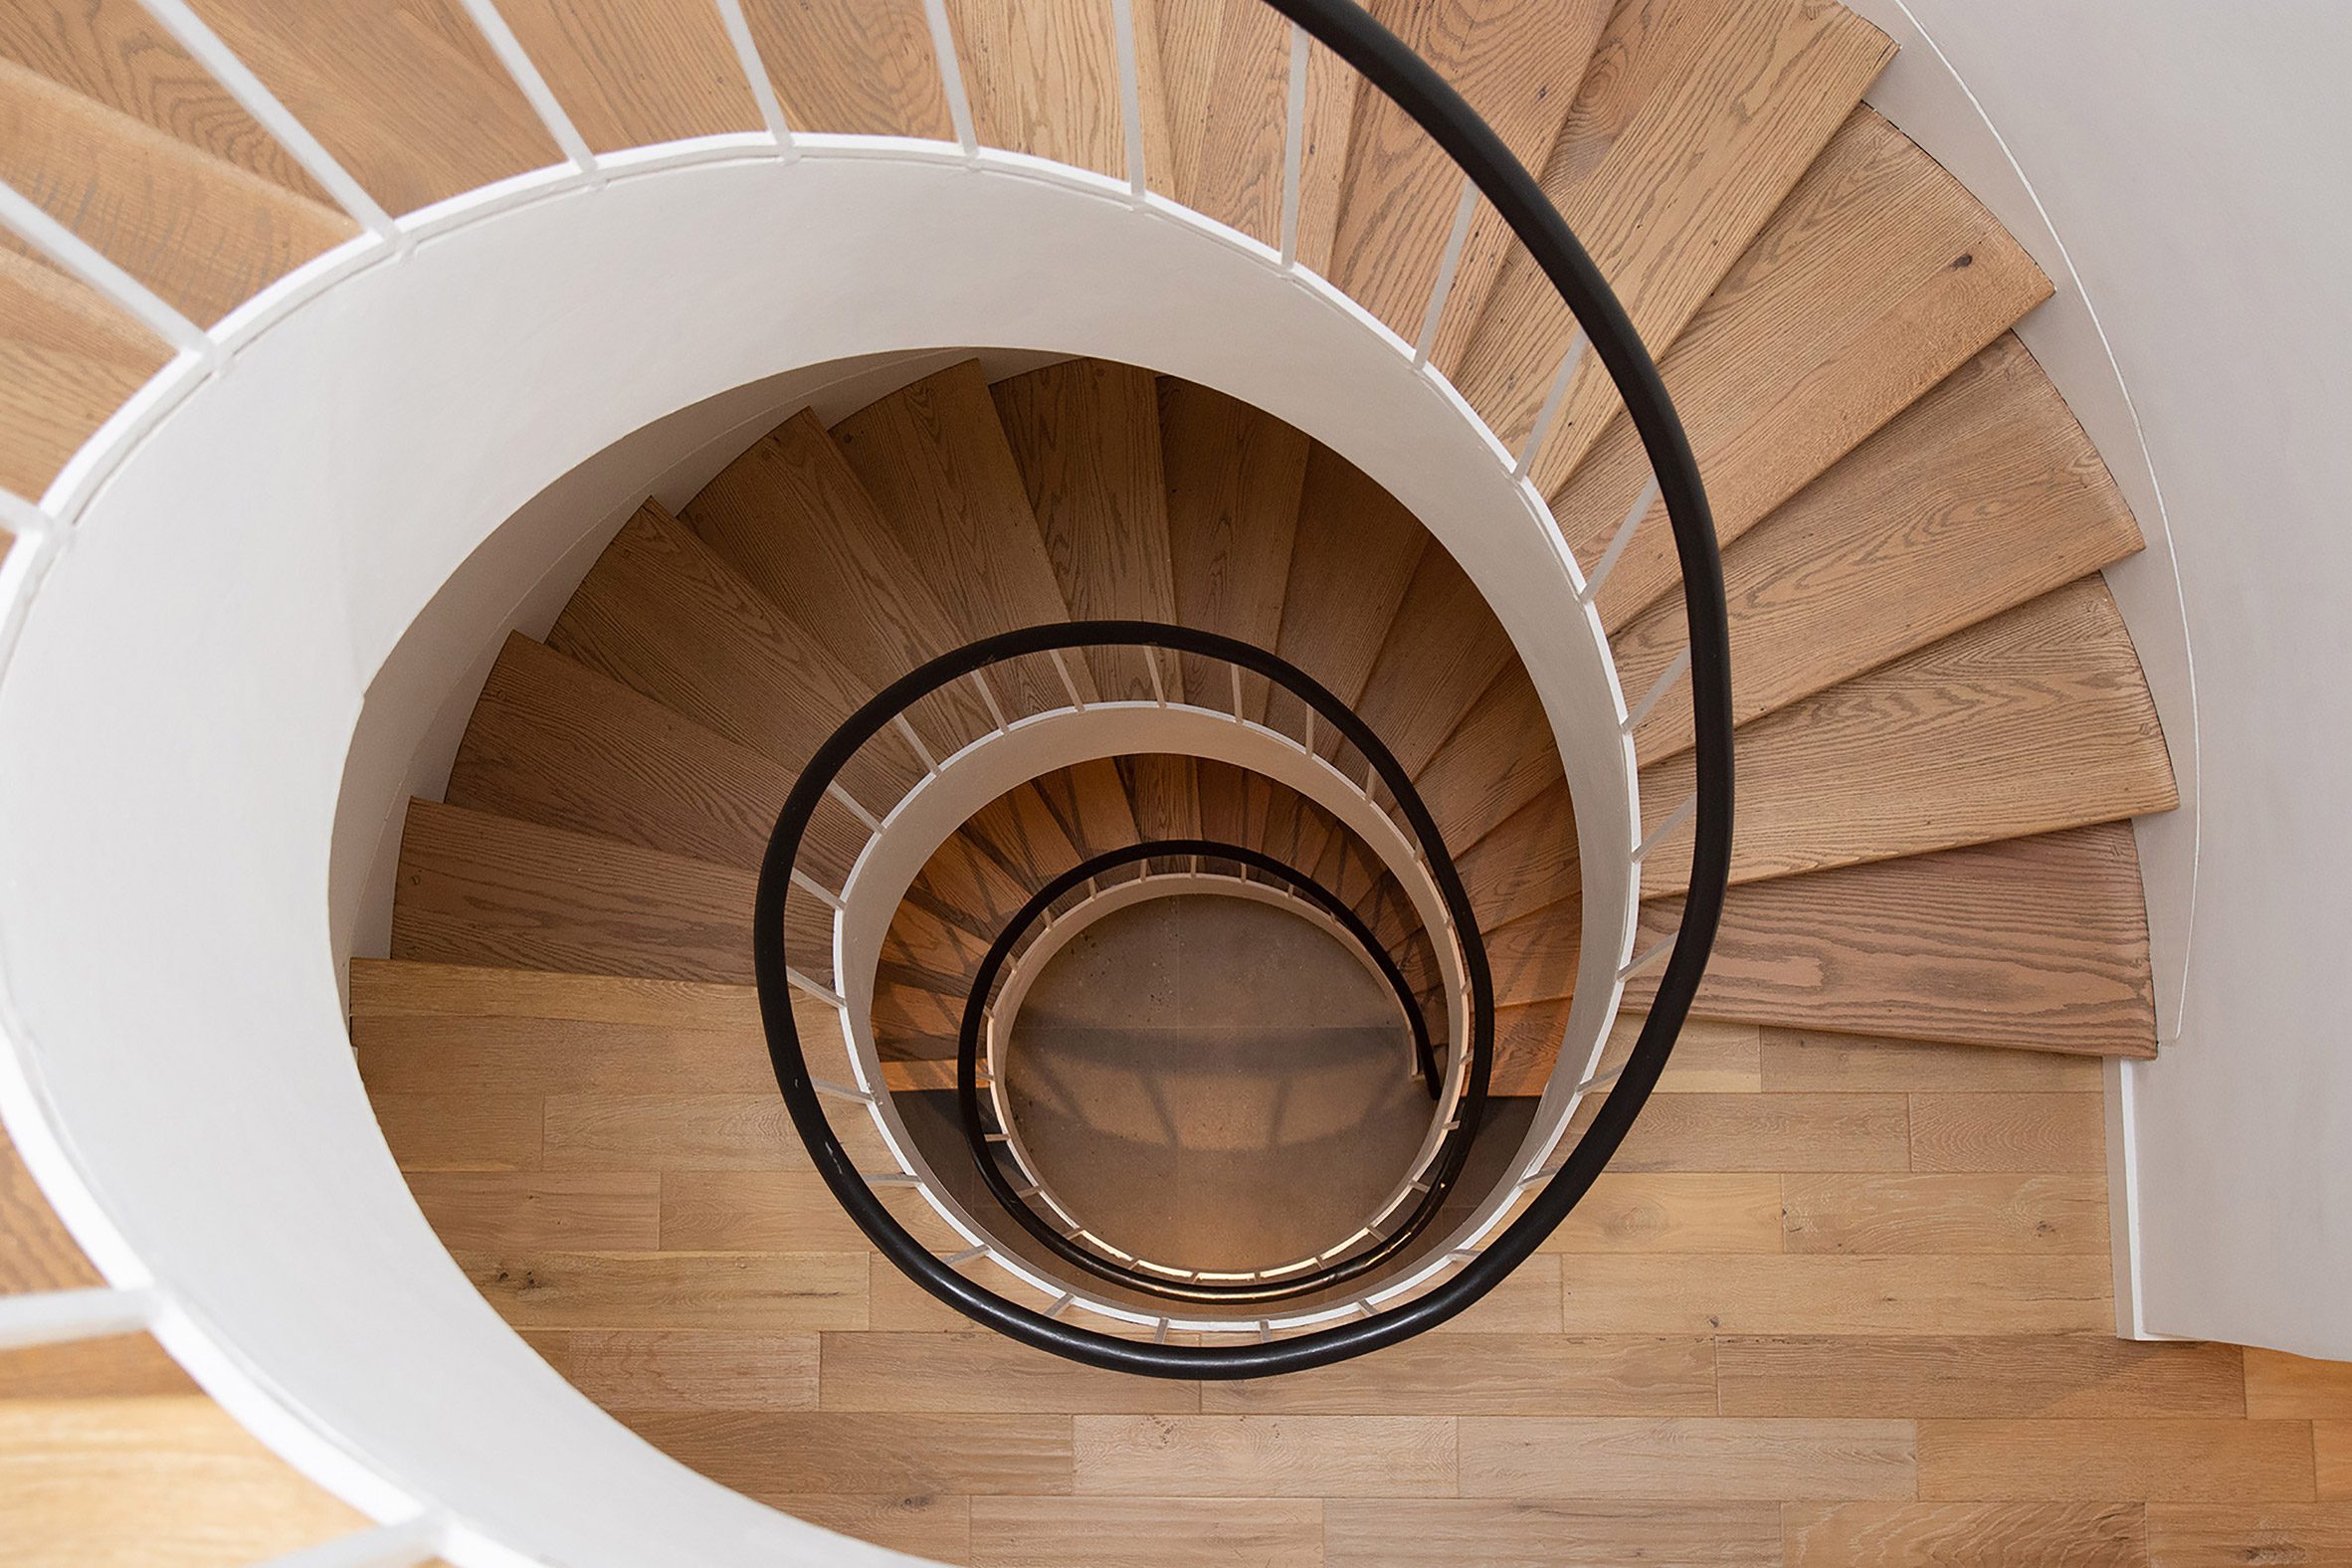 Spiral staircase seen from above